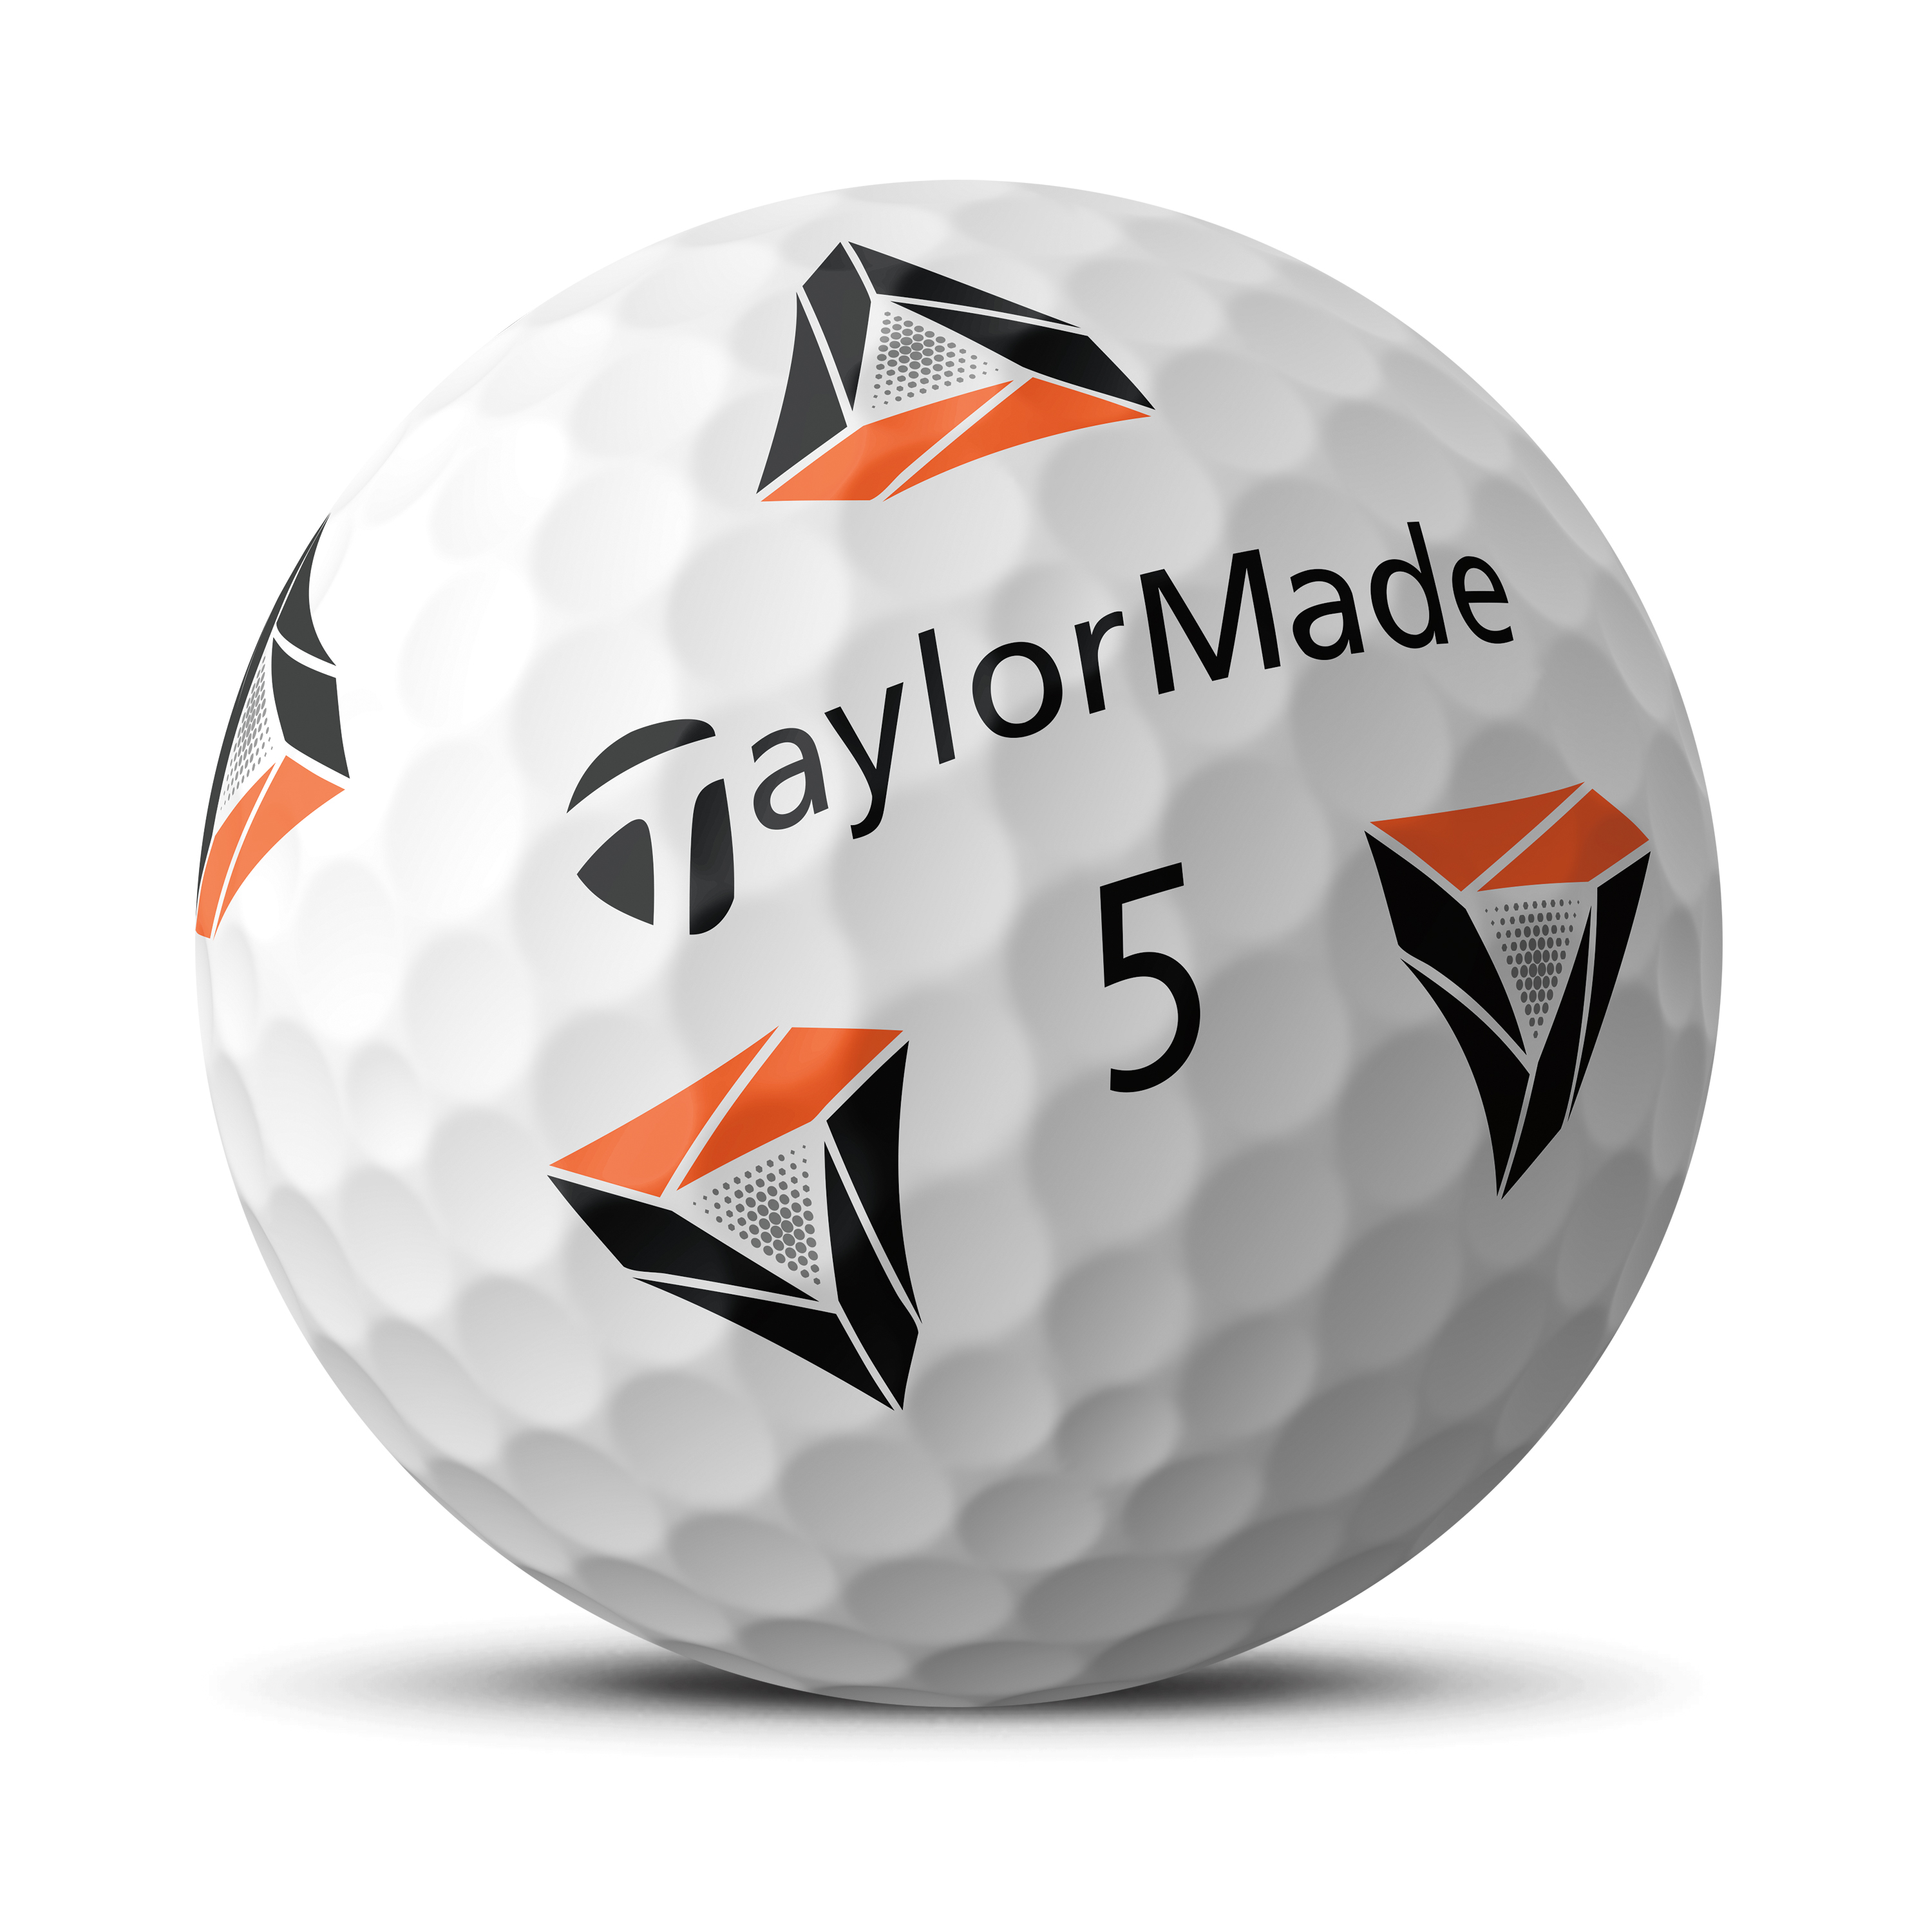 TaylorMade Pix 2.0 balls developed through the scientific